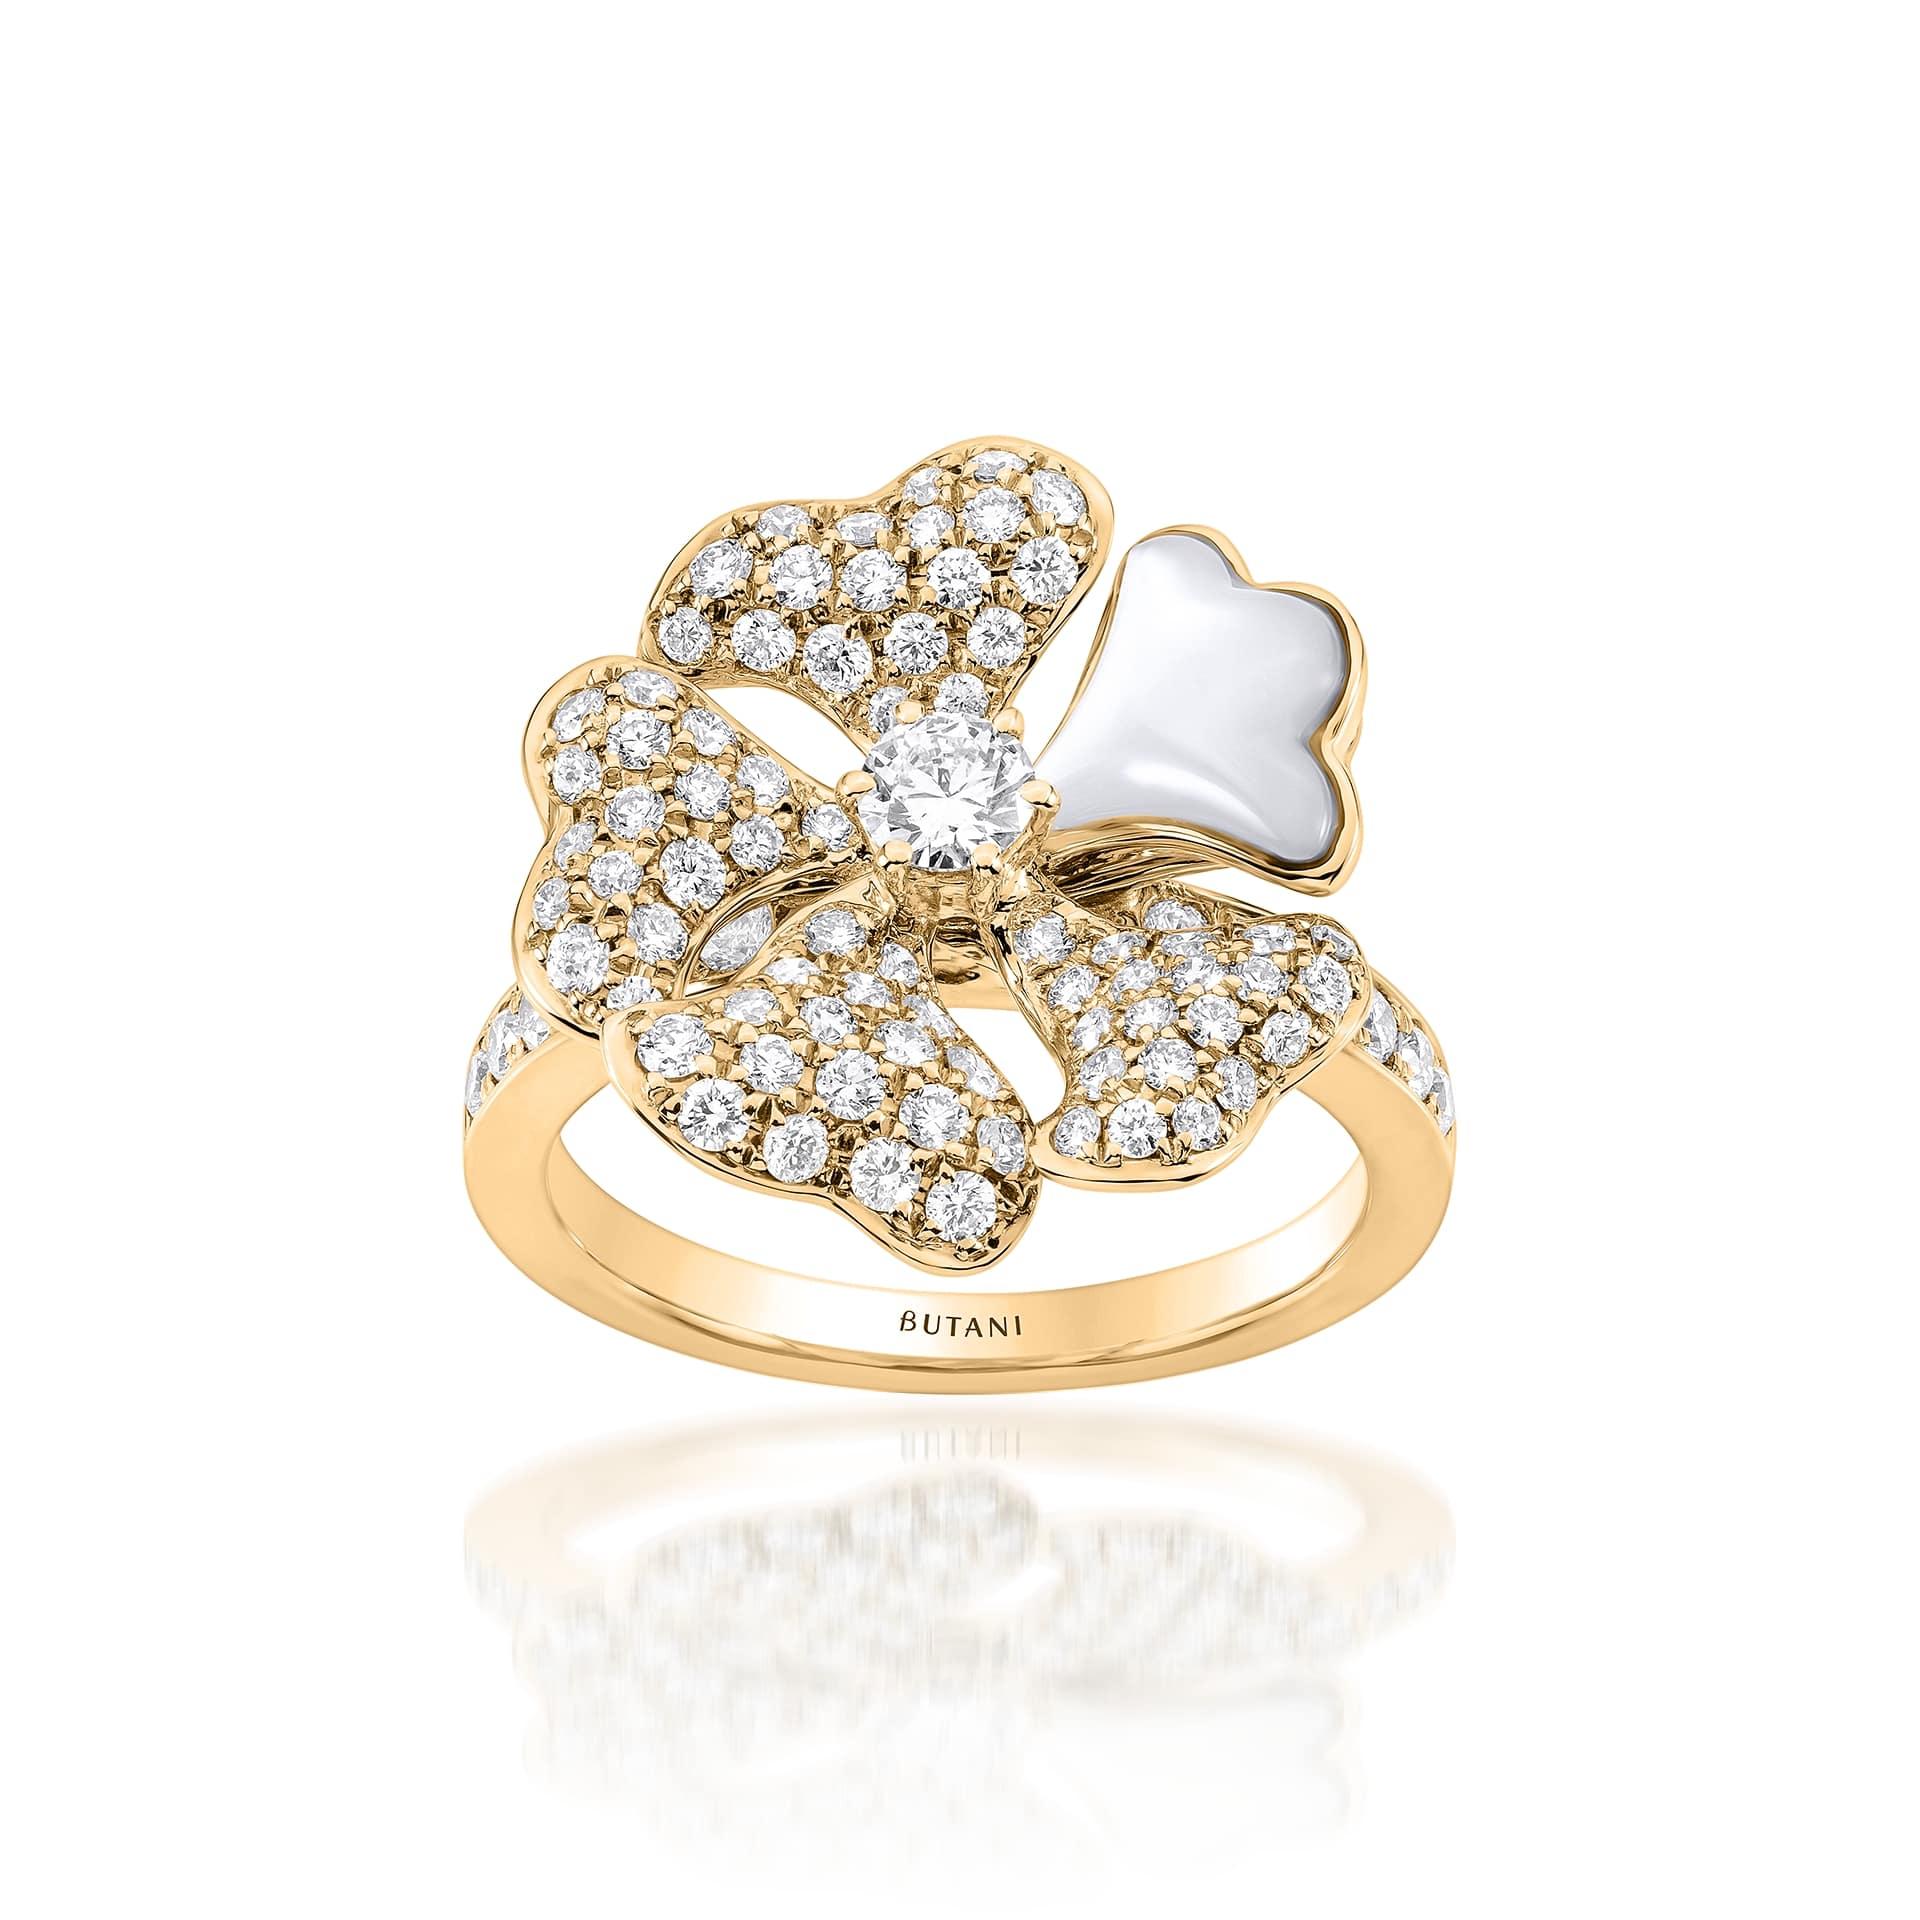 Bloom Mother-of-Pearl and Pavé Diamond Ring in 18K Yellow Gold

Inspired by the exquisite petals of the alpine cinquefoil flower, the Bloom collection combines the richness of diamonds and precious metals with the light versatility of this delicate,